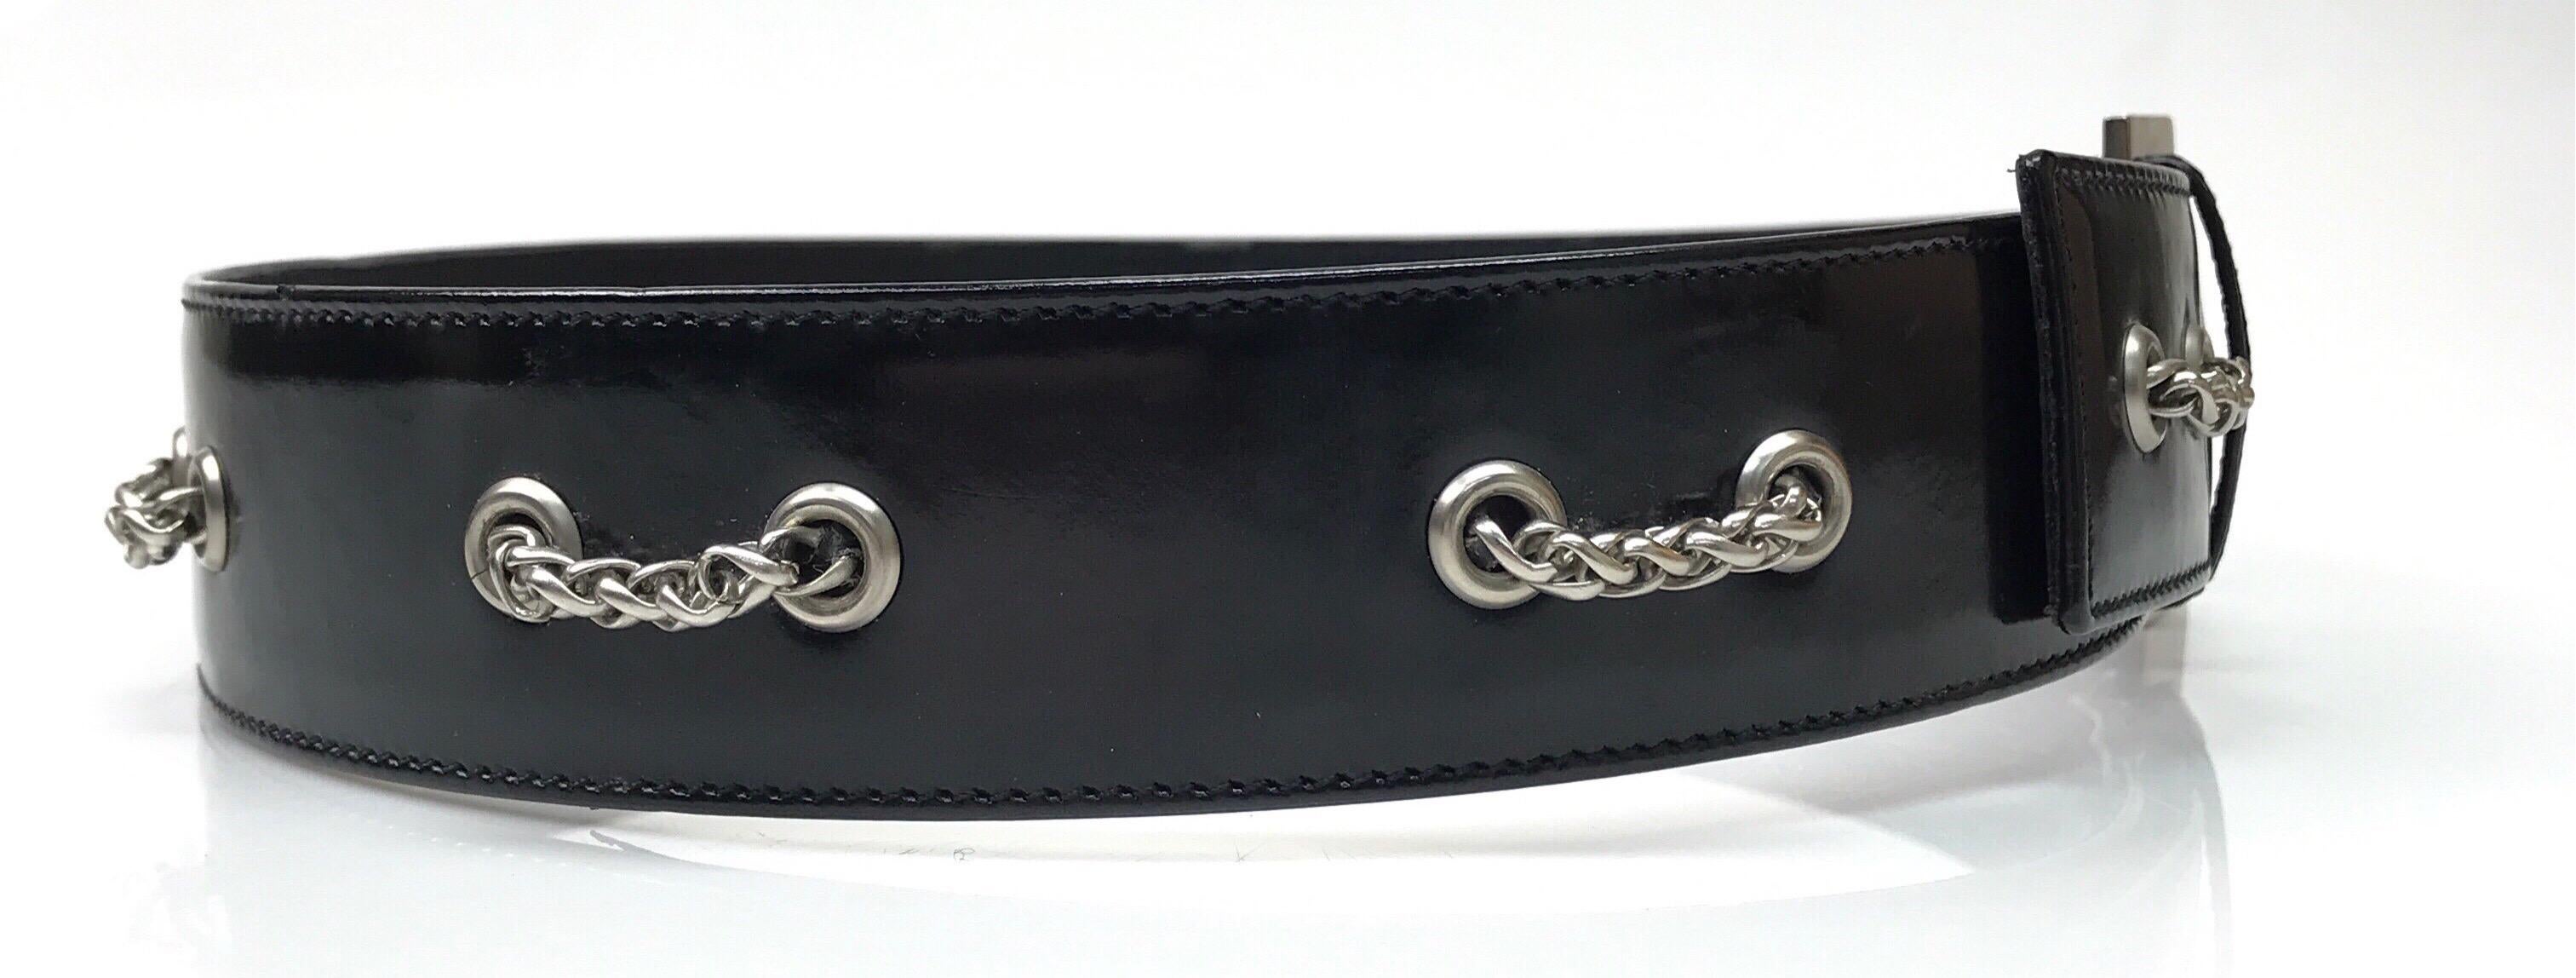 1998 Chanel Black Patent Belt w/ Silver Hardware-28. This amazing Chanel belt is in good condition. It shows visible signs of use with slight discoloration on the outside and creasing of the inside of the belt. It is made of black patent leather on